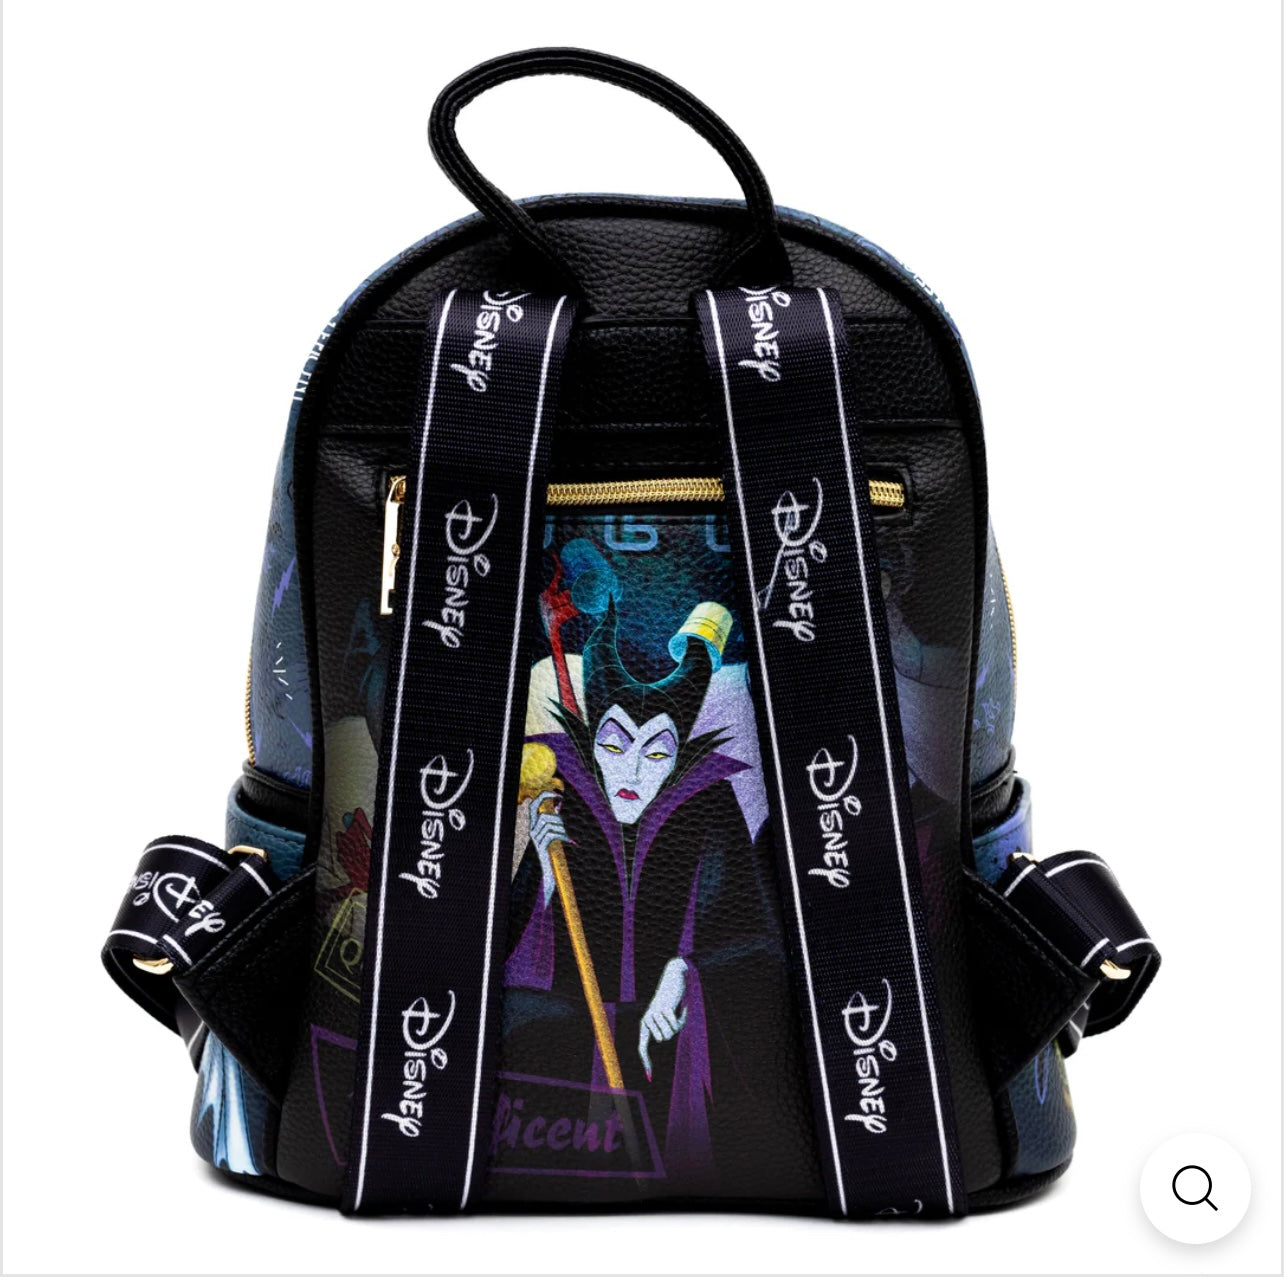 Exclusive Limited Edition- Maleficent Vegan Leather Backpack